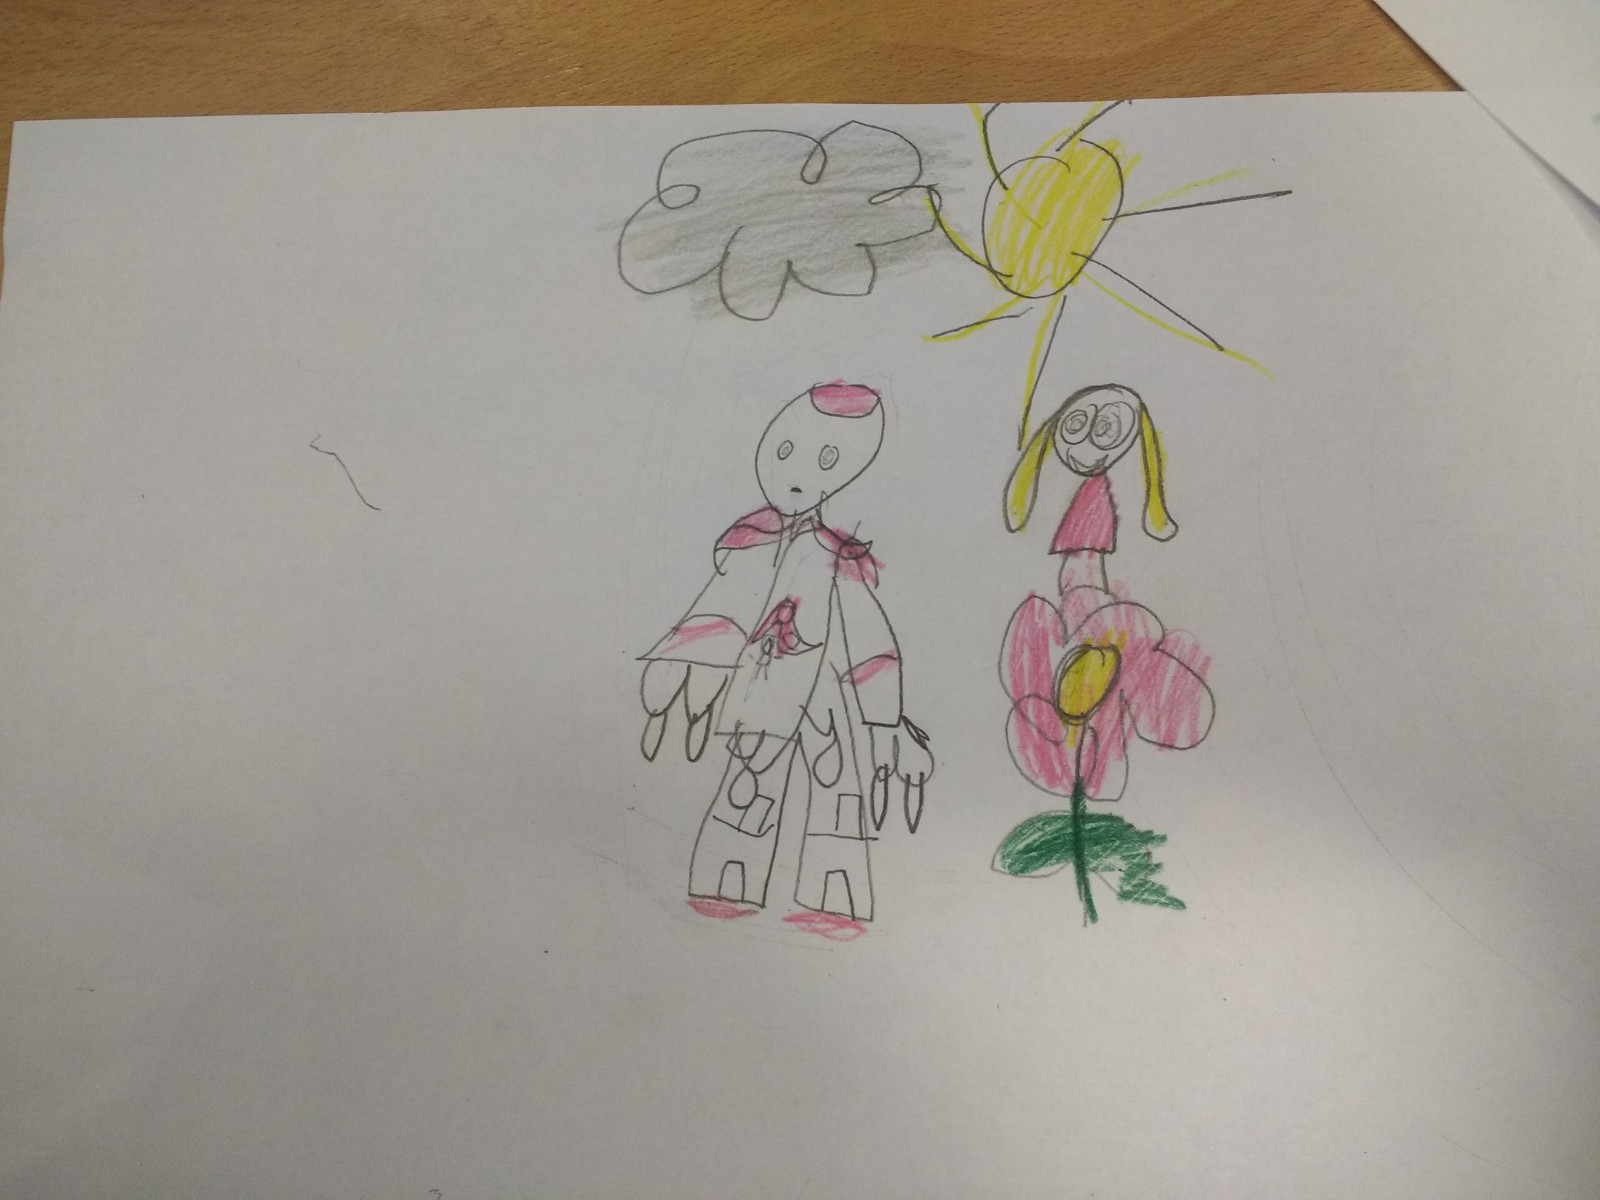 A Example of a drawing made by on of the children